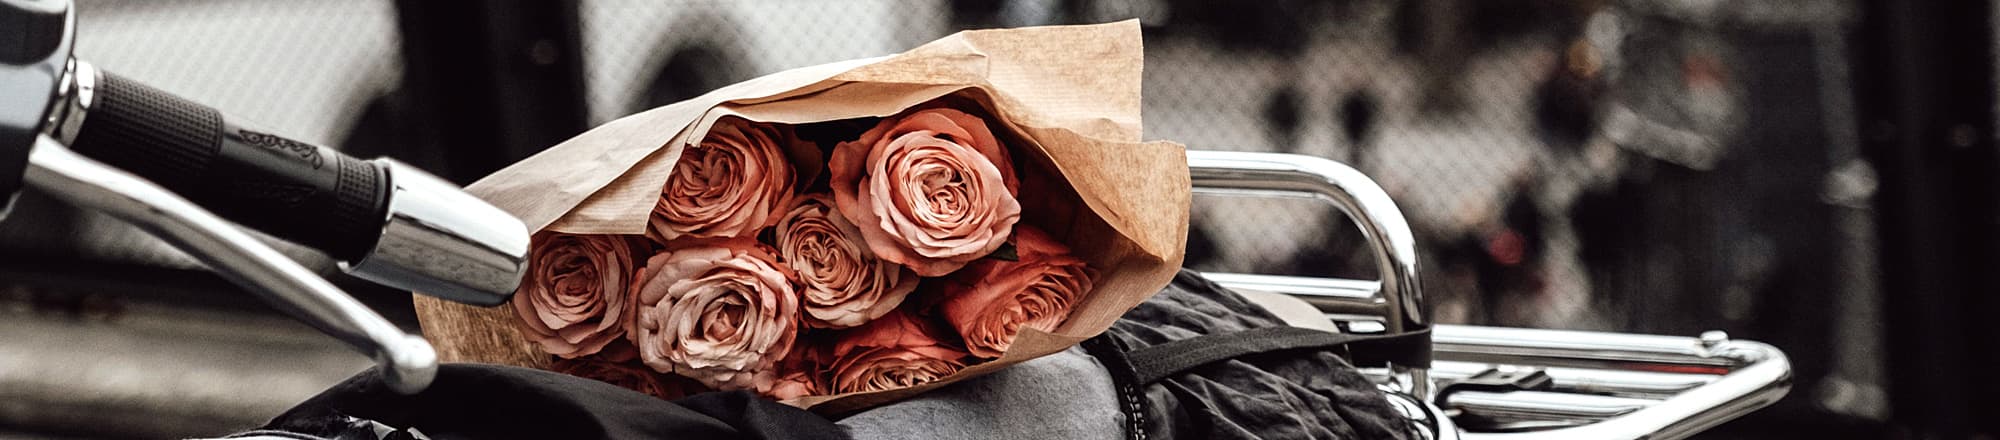 How to get flower gifts home safely from the office